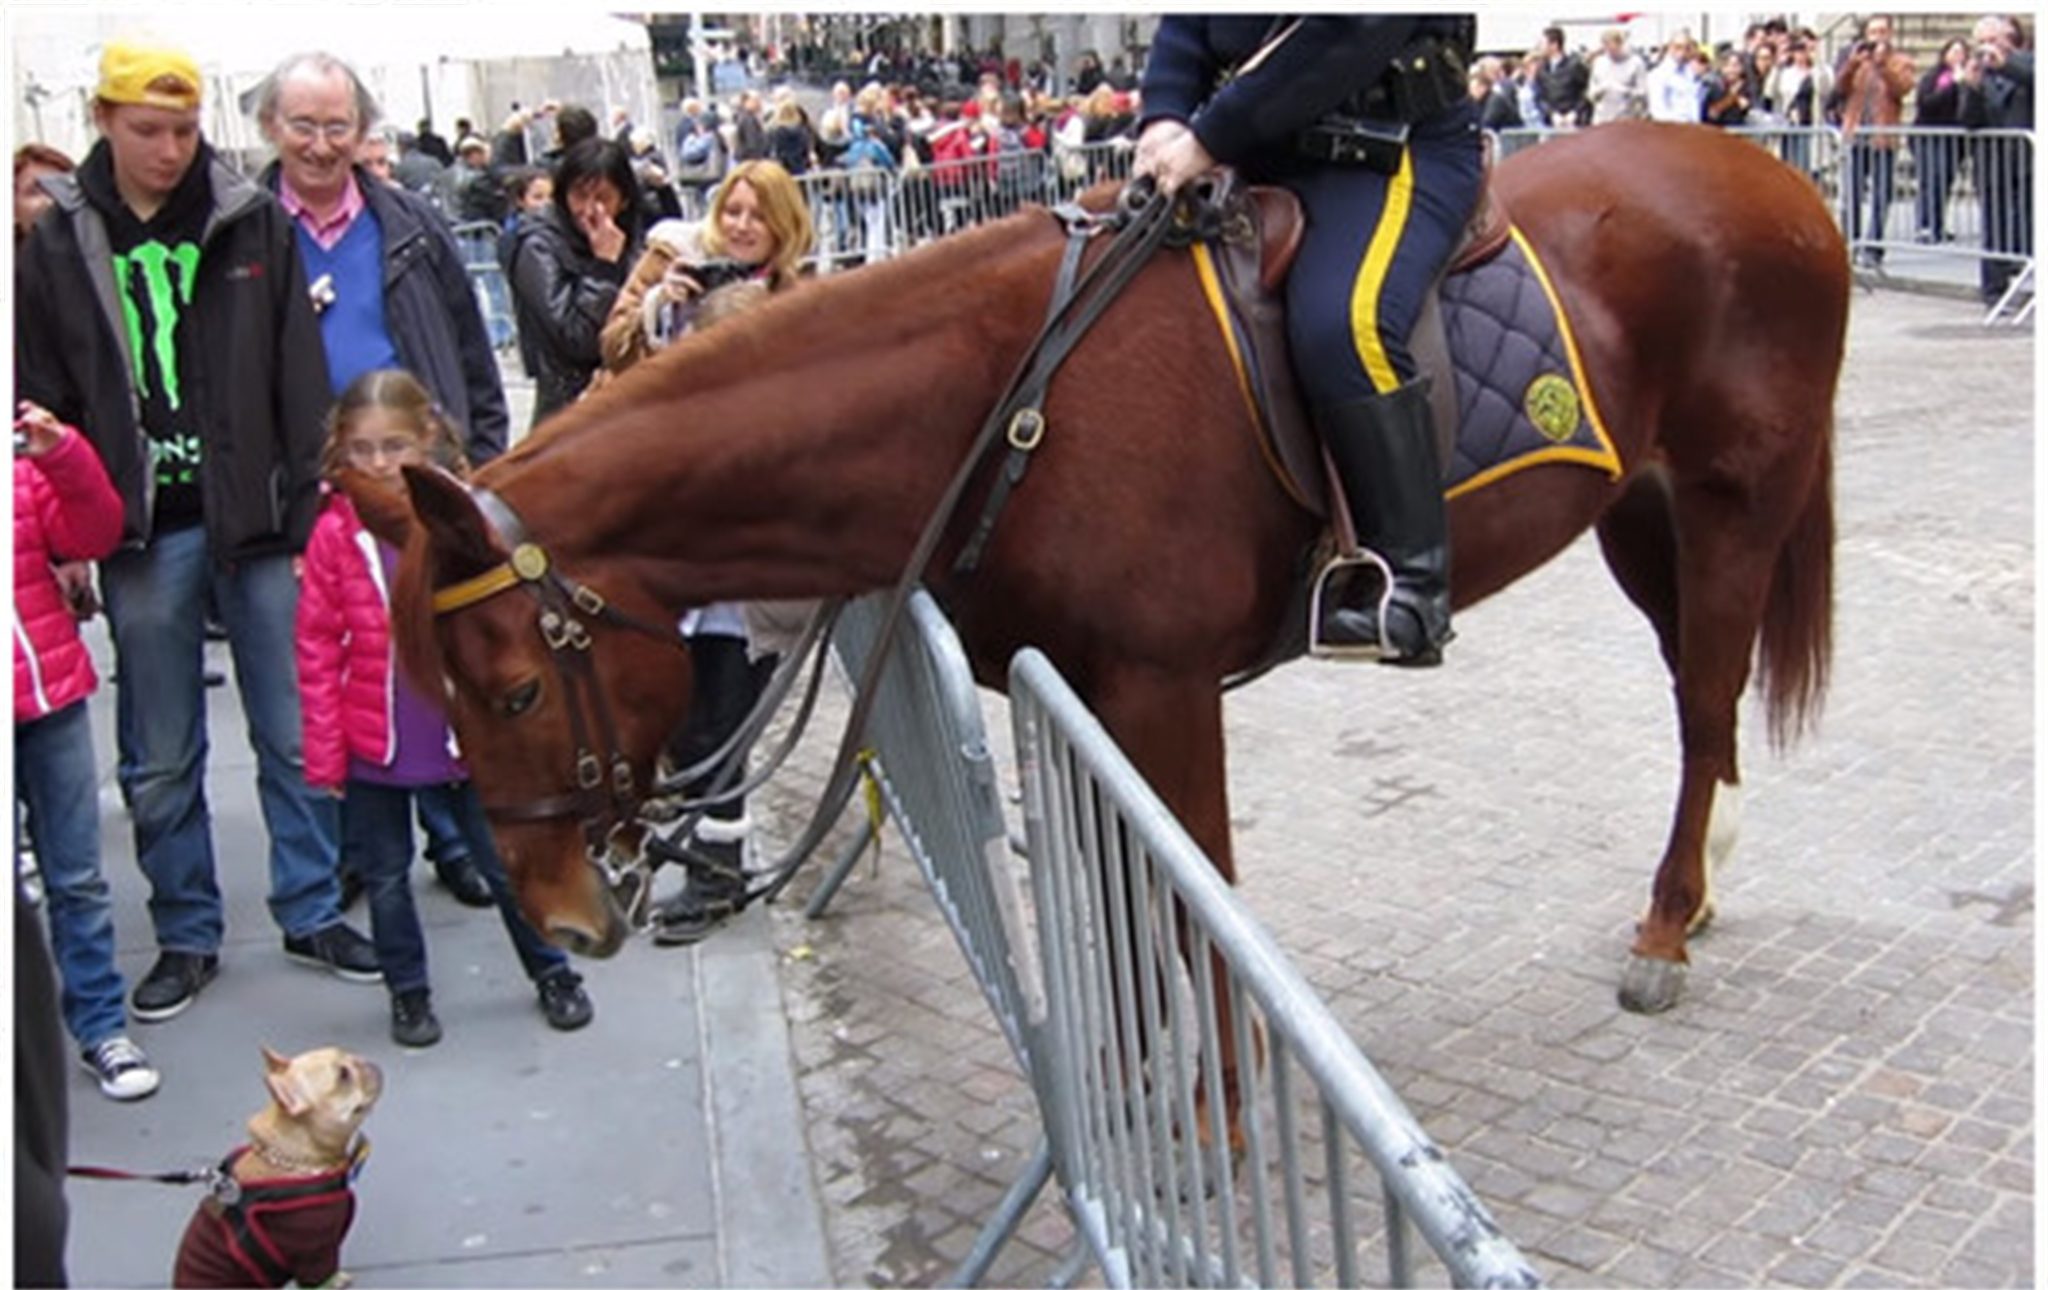 Unlikely Friendship: Adorable Puppy Strikes Up a Conversation with Massive Police Horse, Leaving Passersby Mesmerized